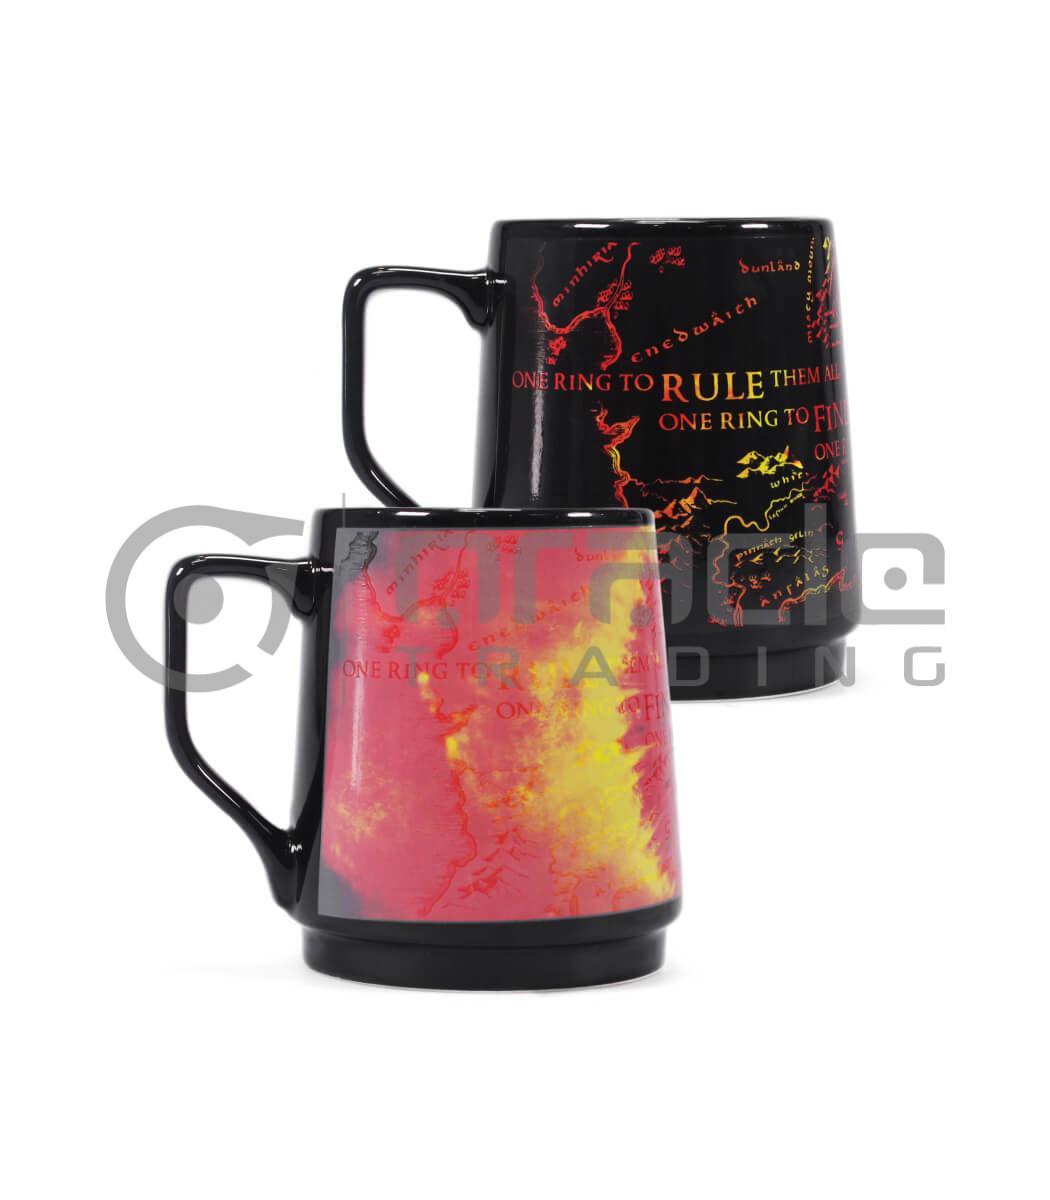 Lord of the Rings Heat Reveal Tankard - Eye of Sauron